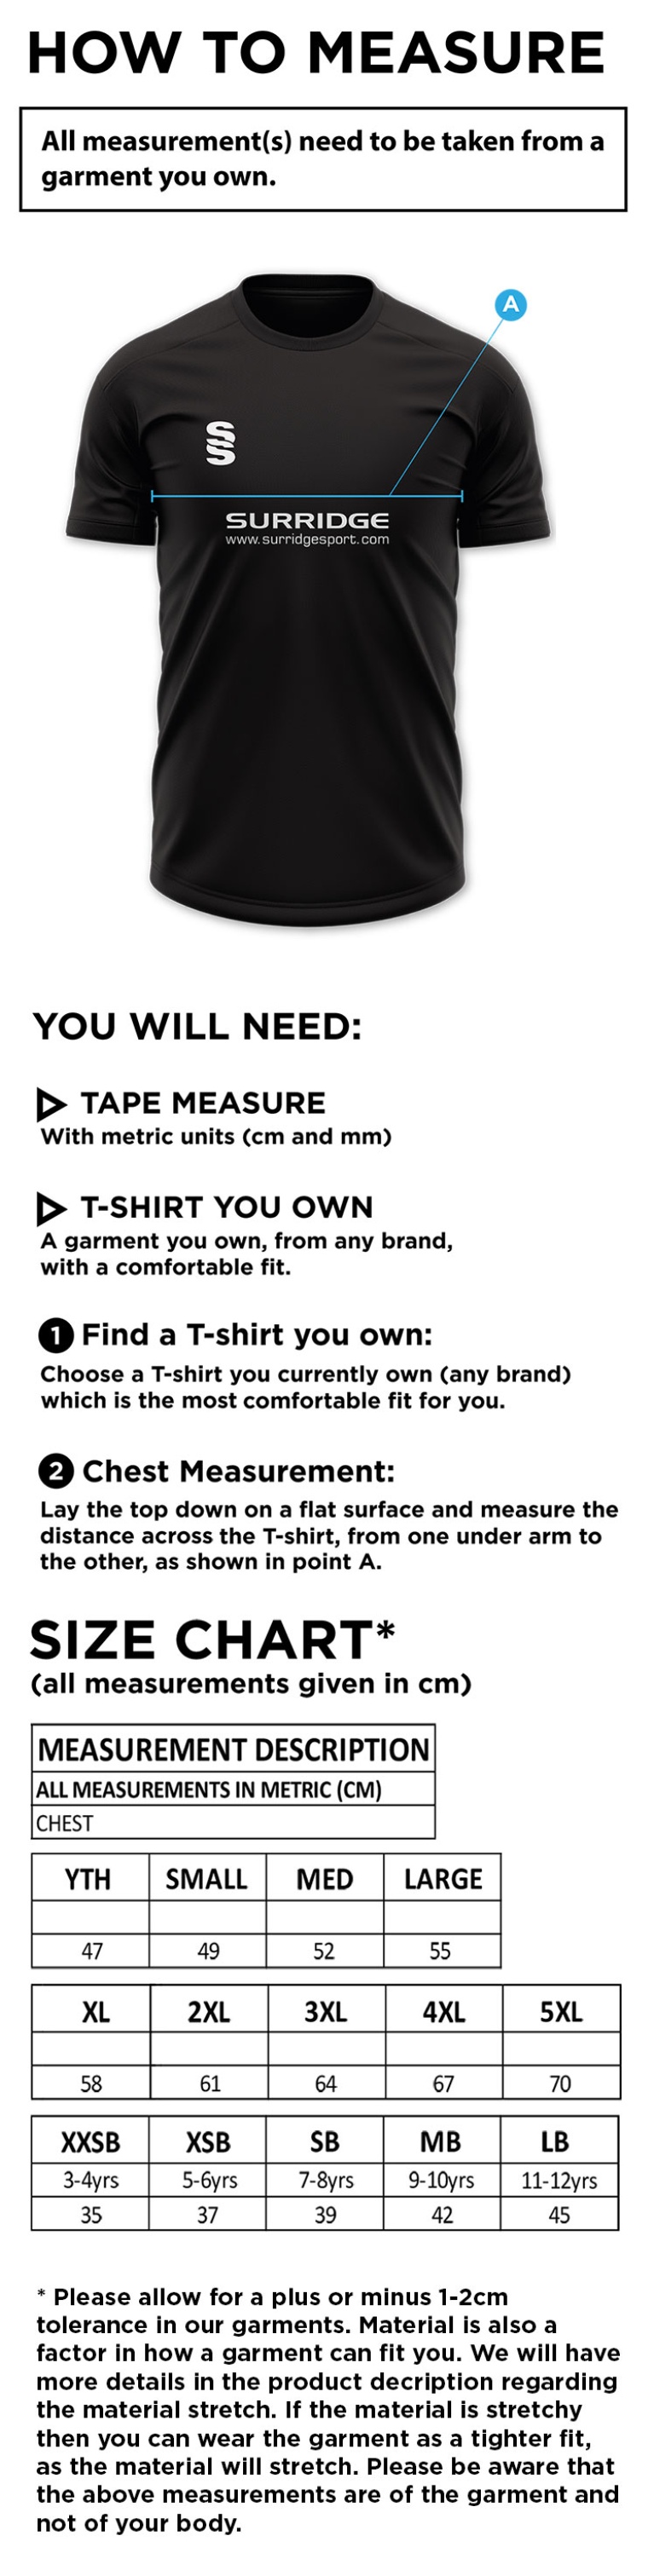 Youth's Camo Games Shirt : Maroon - Size Guide